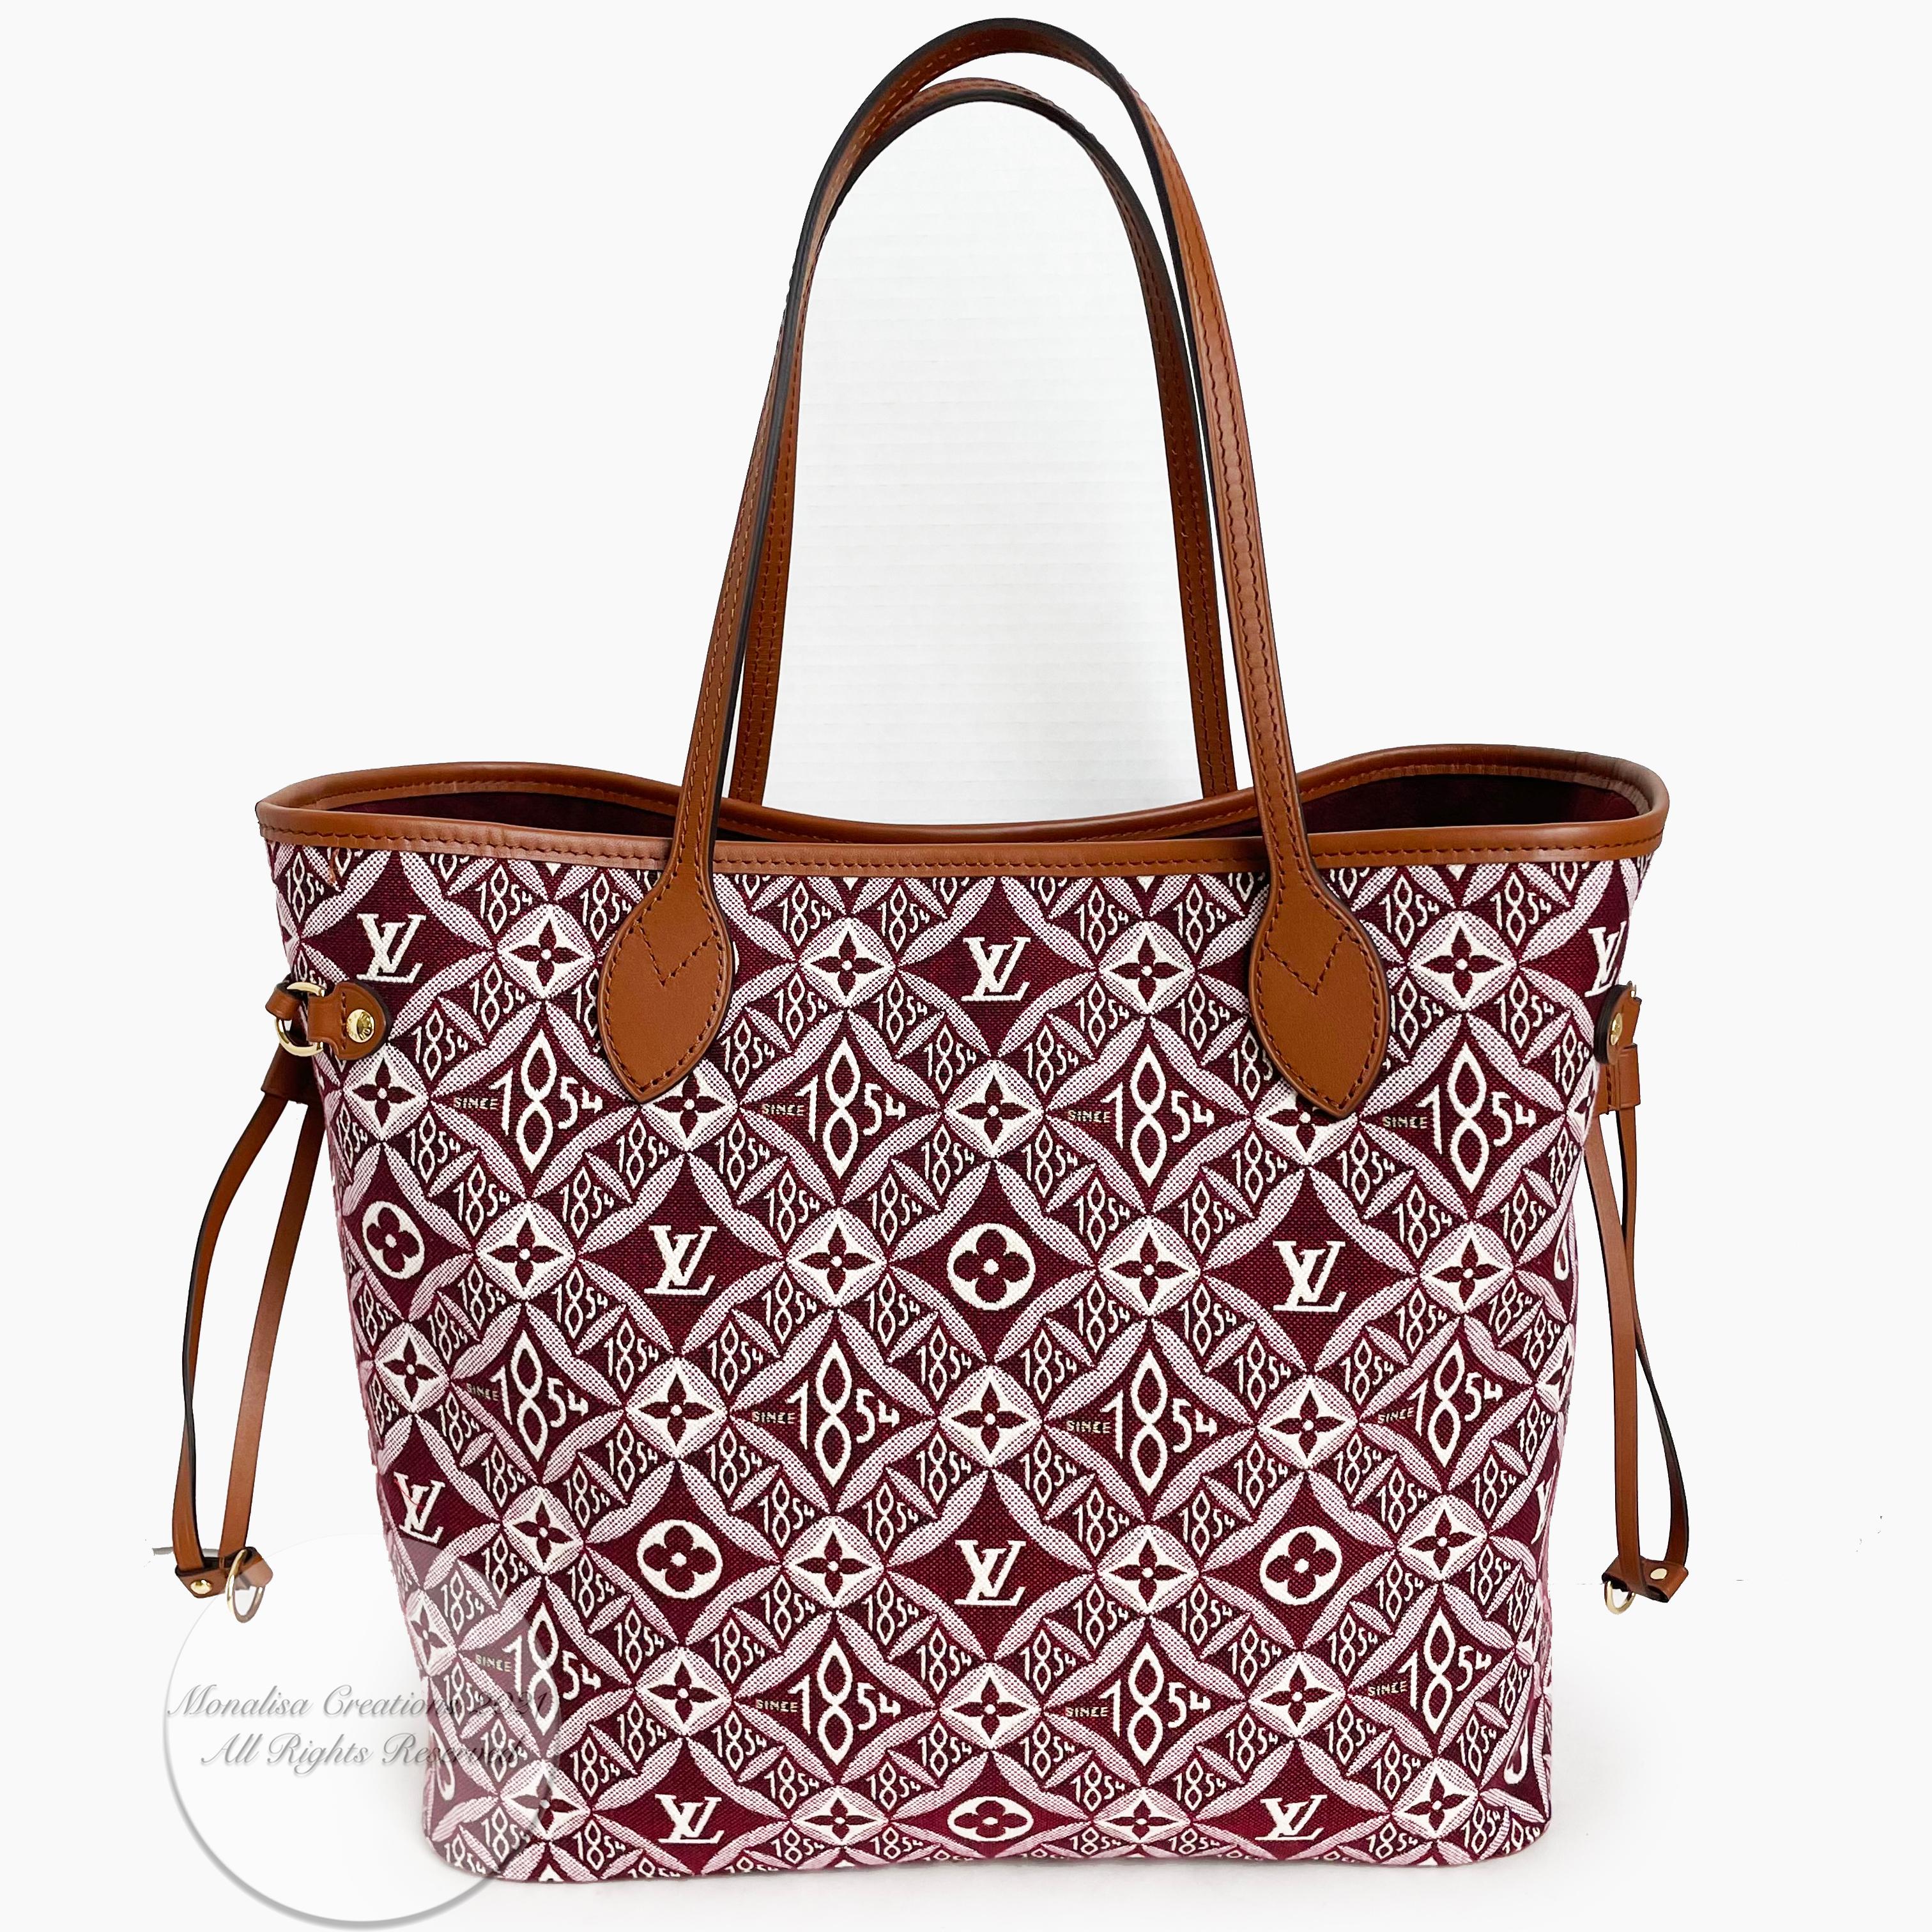 Louis Vuitton Since 1854 Neverfull Tote Bag Bordeaux + Removable Pouch in Box  3